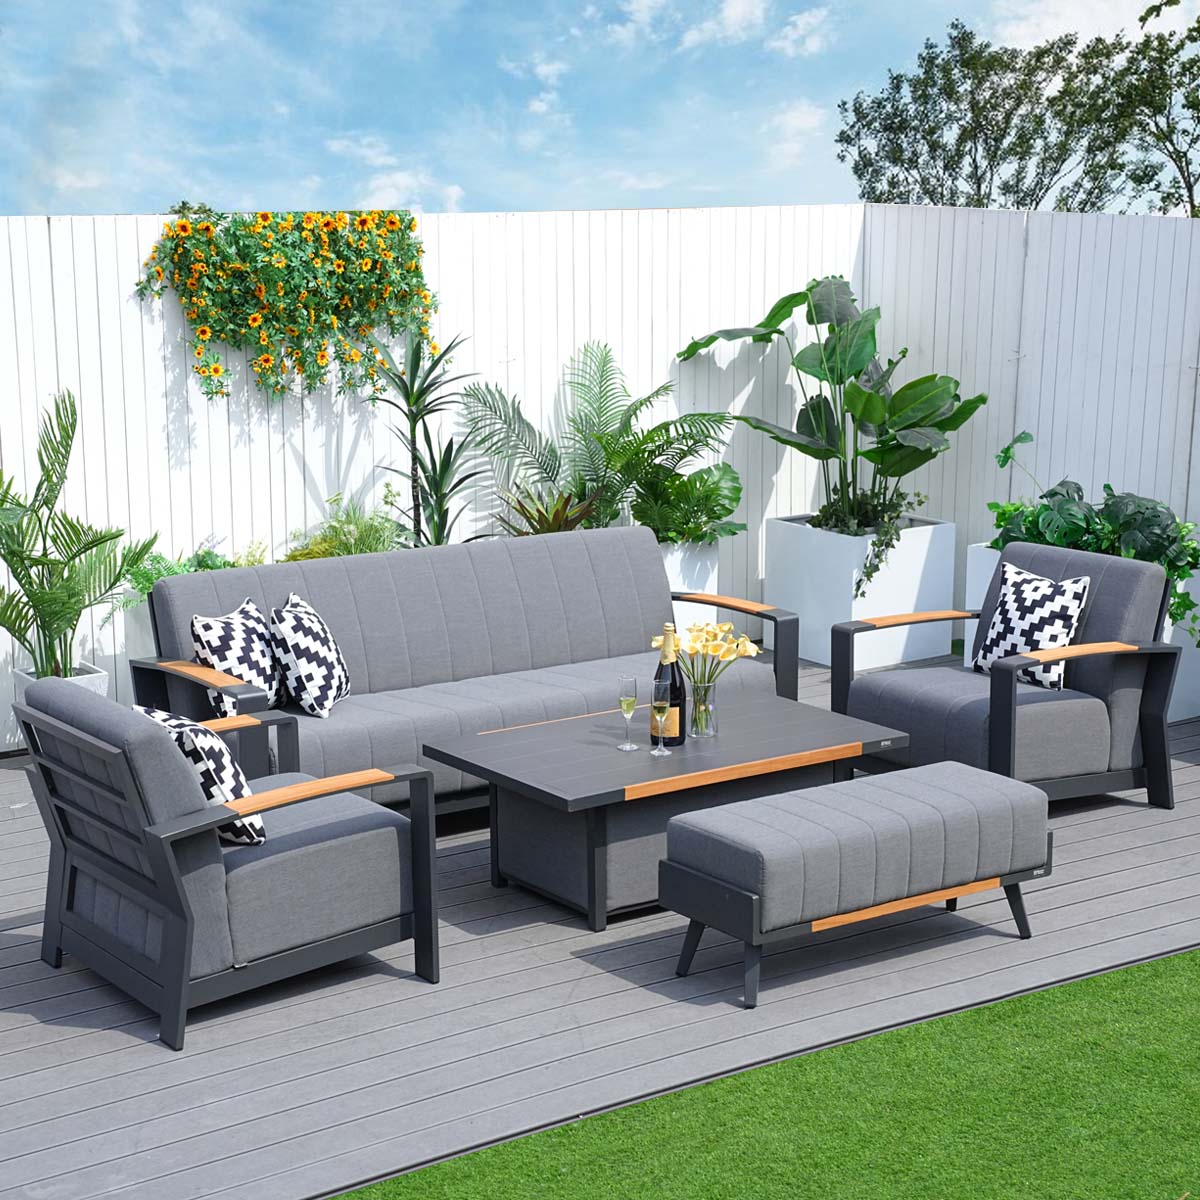 The latest furniture on the market - Abrihome 5-Pieces Patio Garden Aluminum Seating Set with Armchairs